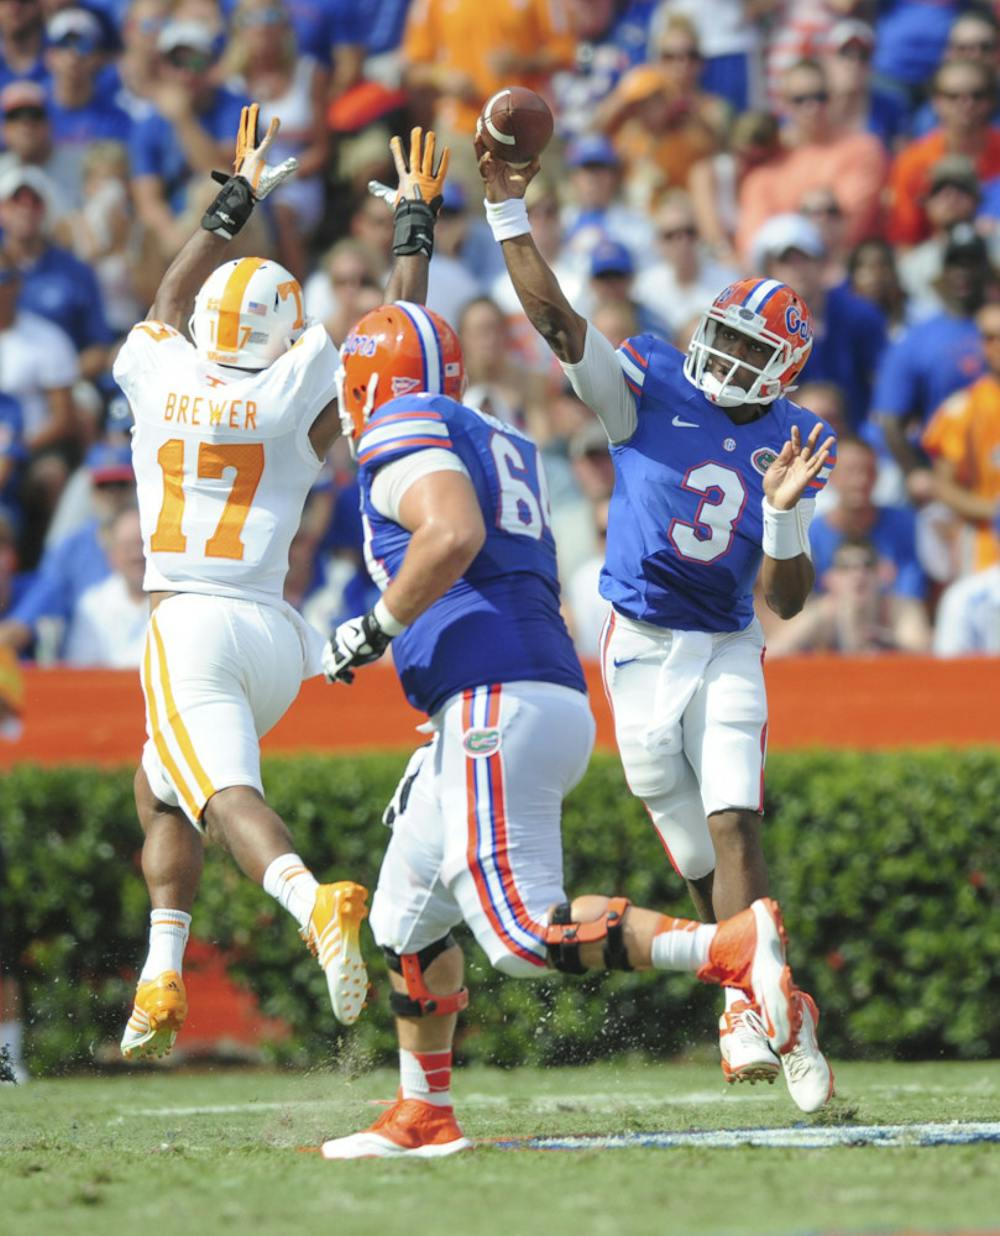 <p>Tyler Murphy took over at quarterback for the injured Jeff Driskel and completed 8 of his 14 passes for 134 yards and a touchdown Saturday against Tennessee.</p>